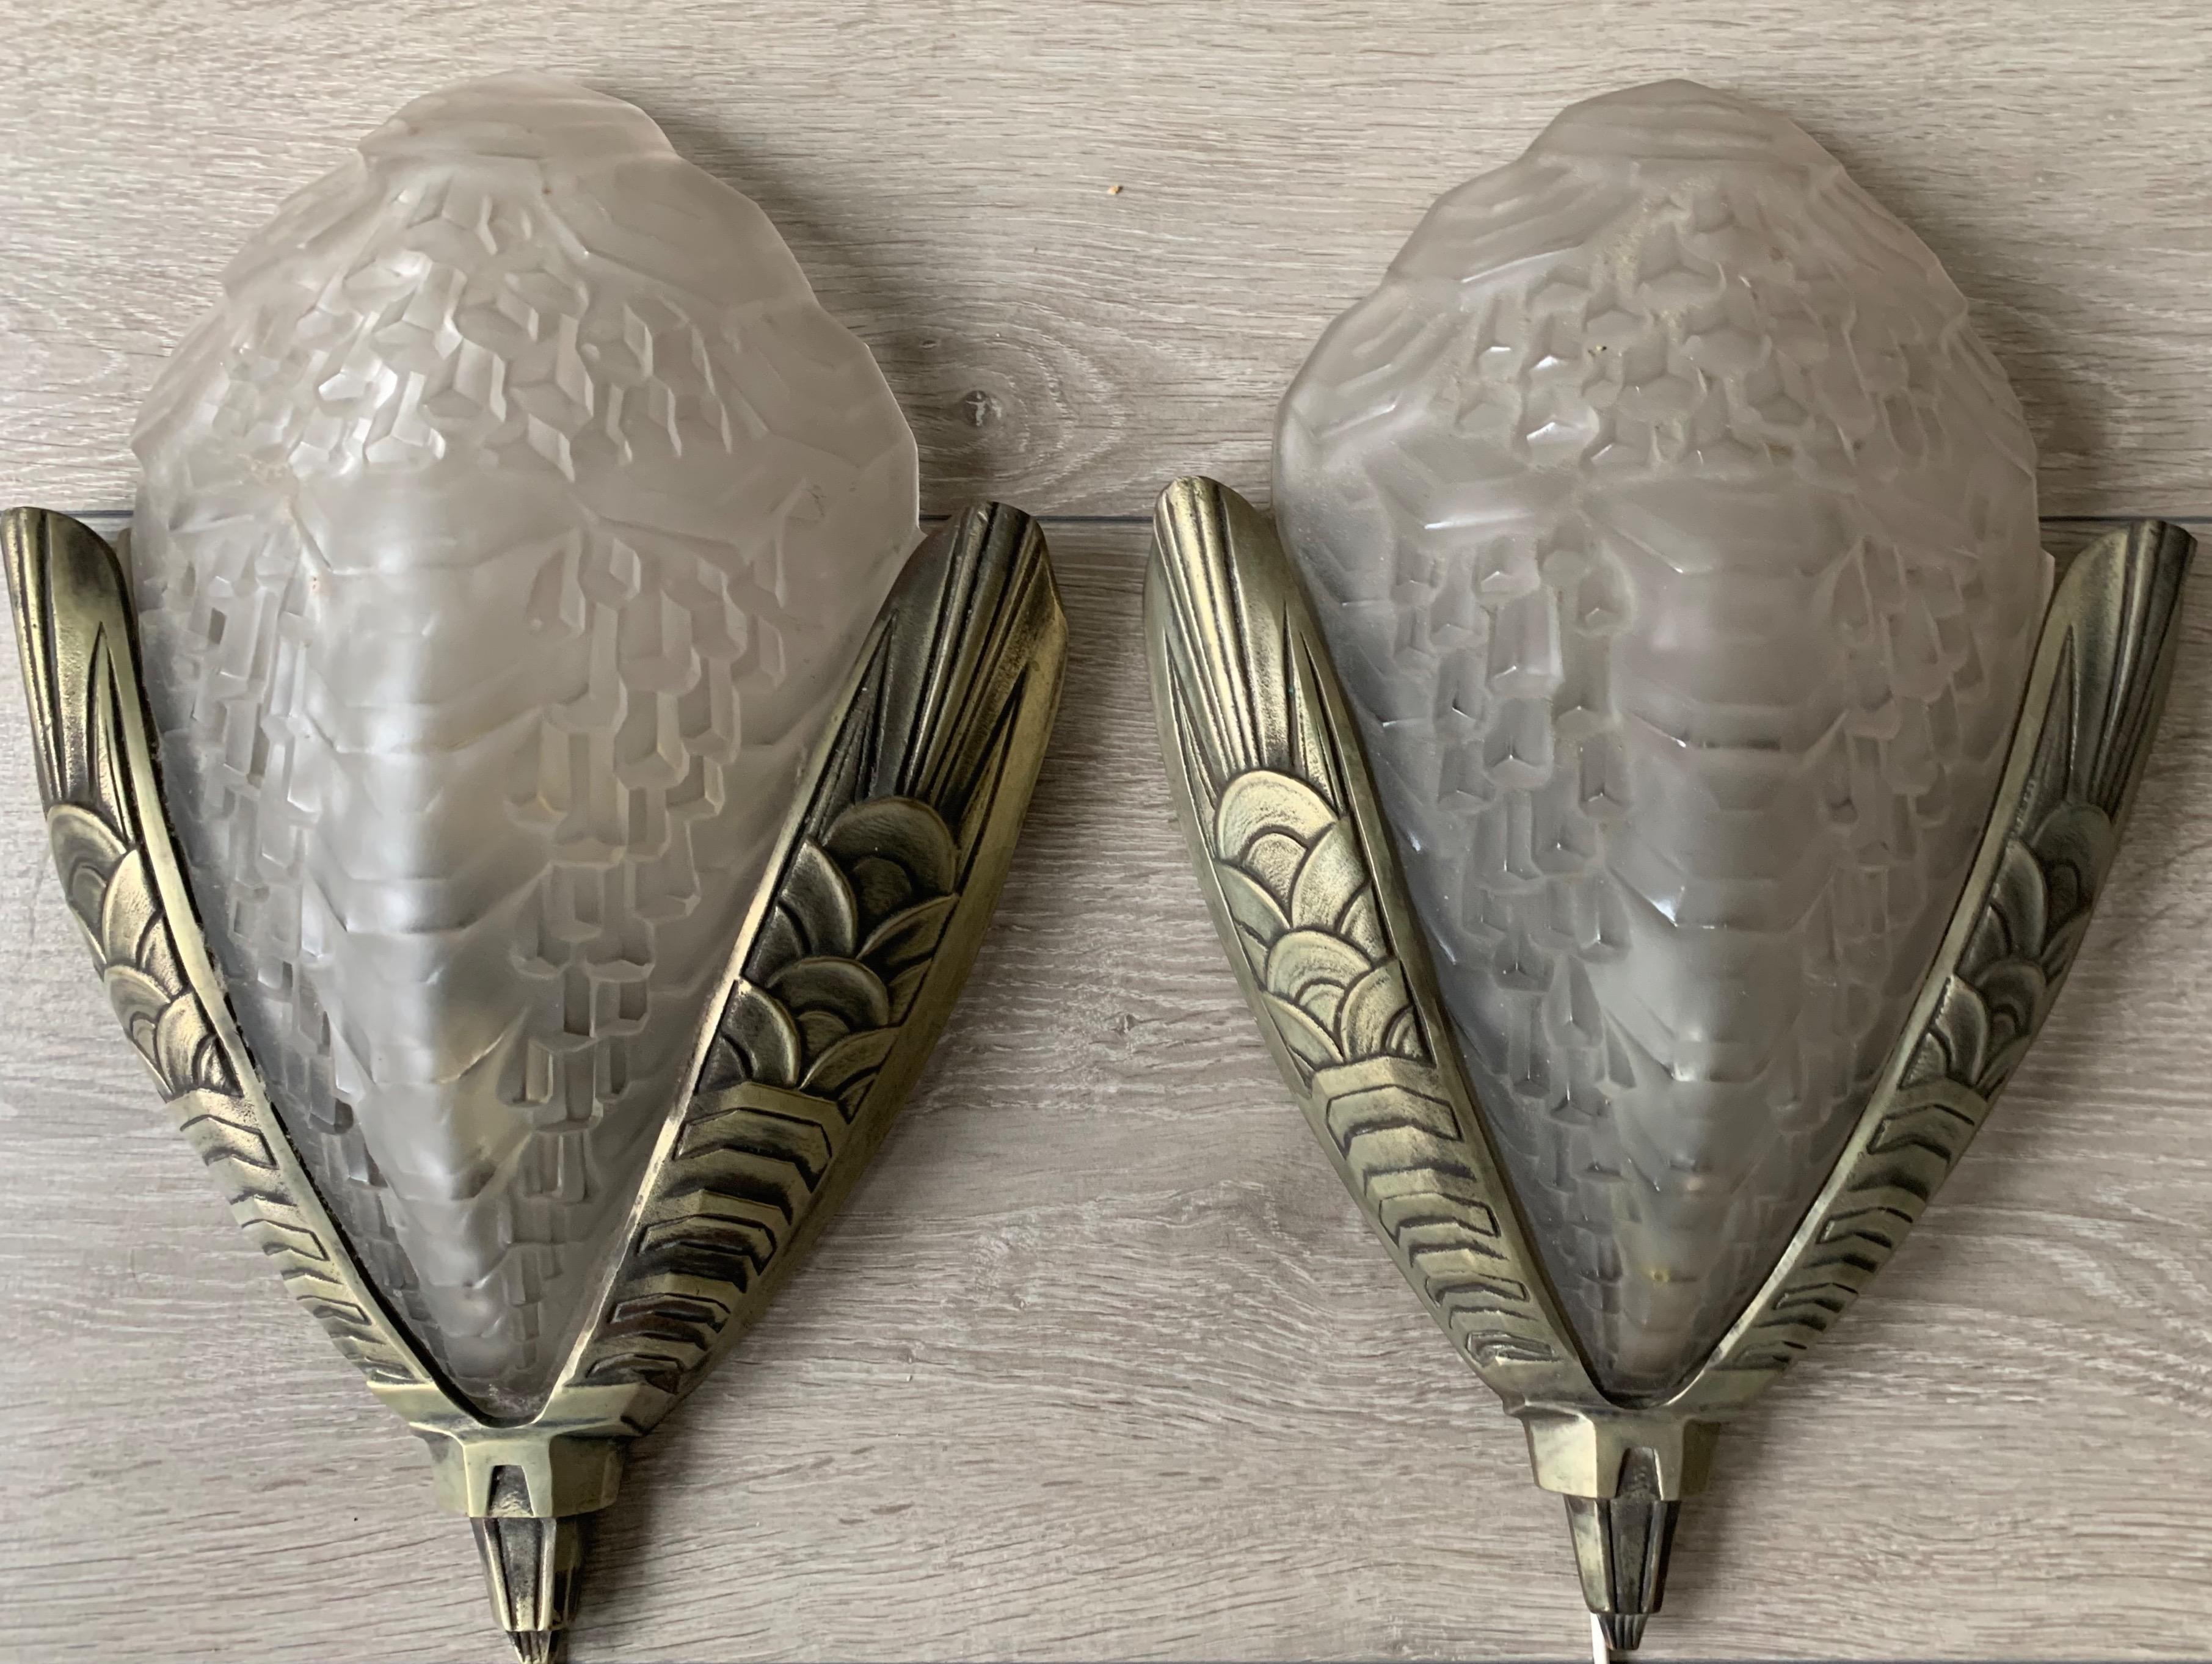 Impressive pair of bronze wall lights with perfect glass shades.

If you are looking for a pair of beautiful and good quality Art Deco wall sconces then these striking lights should be on your shortlist. Both in design and execution these Art Deco